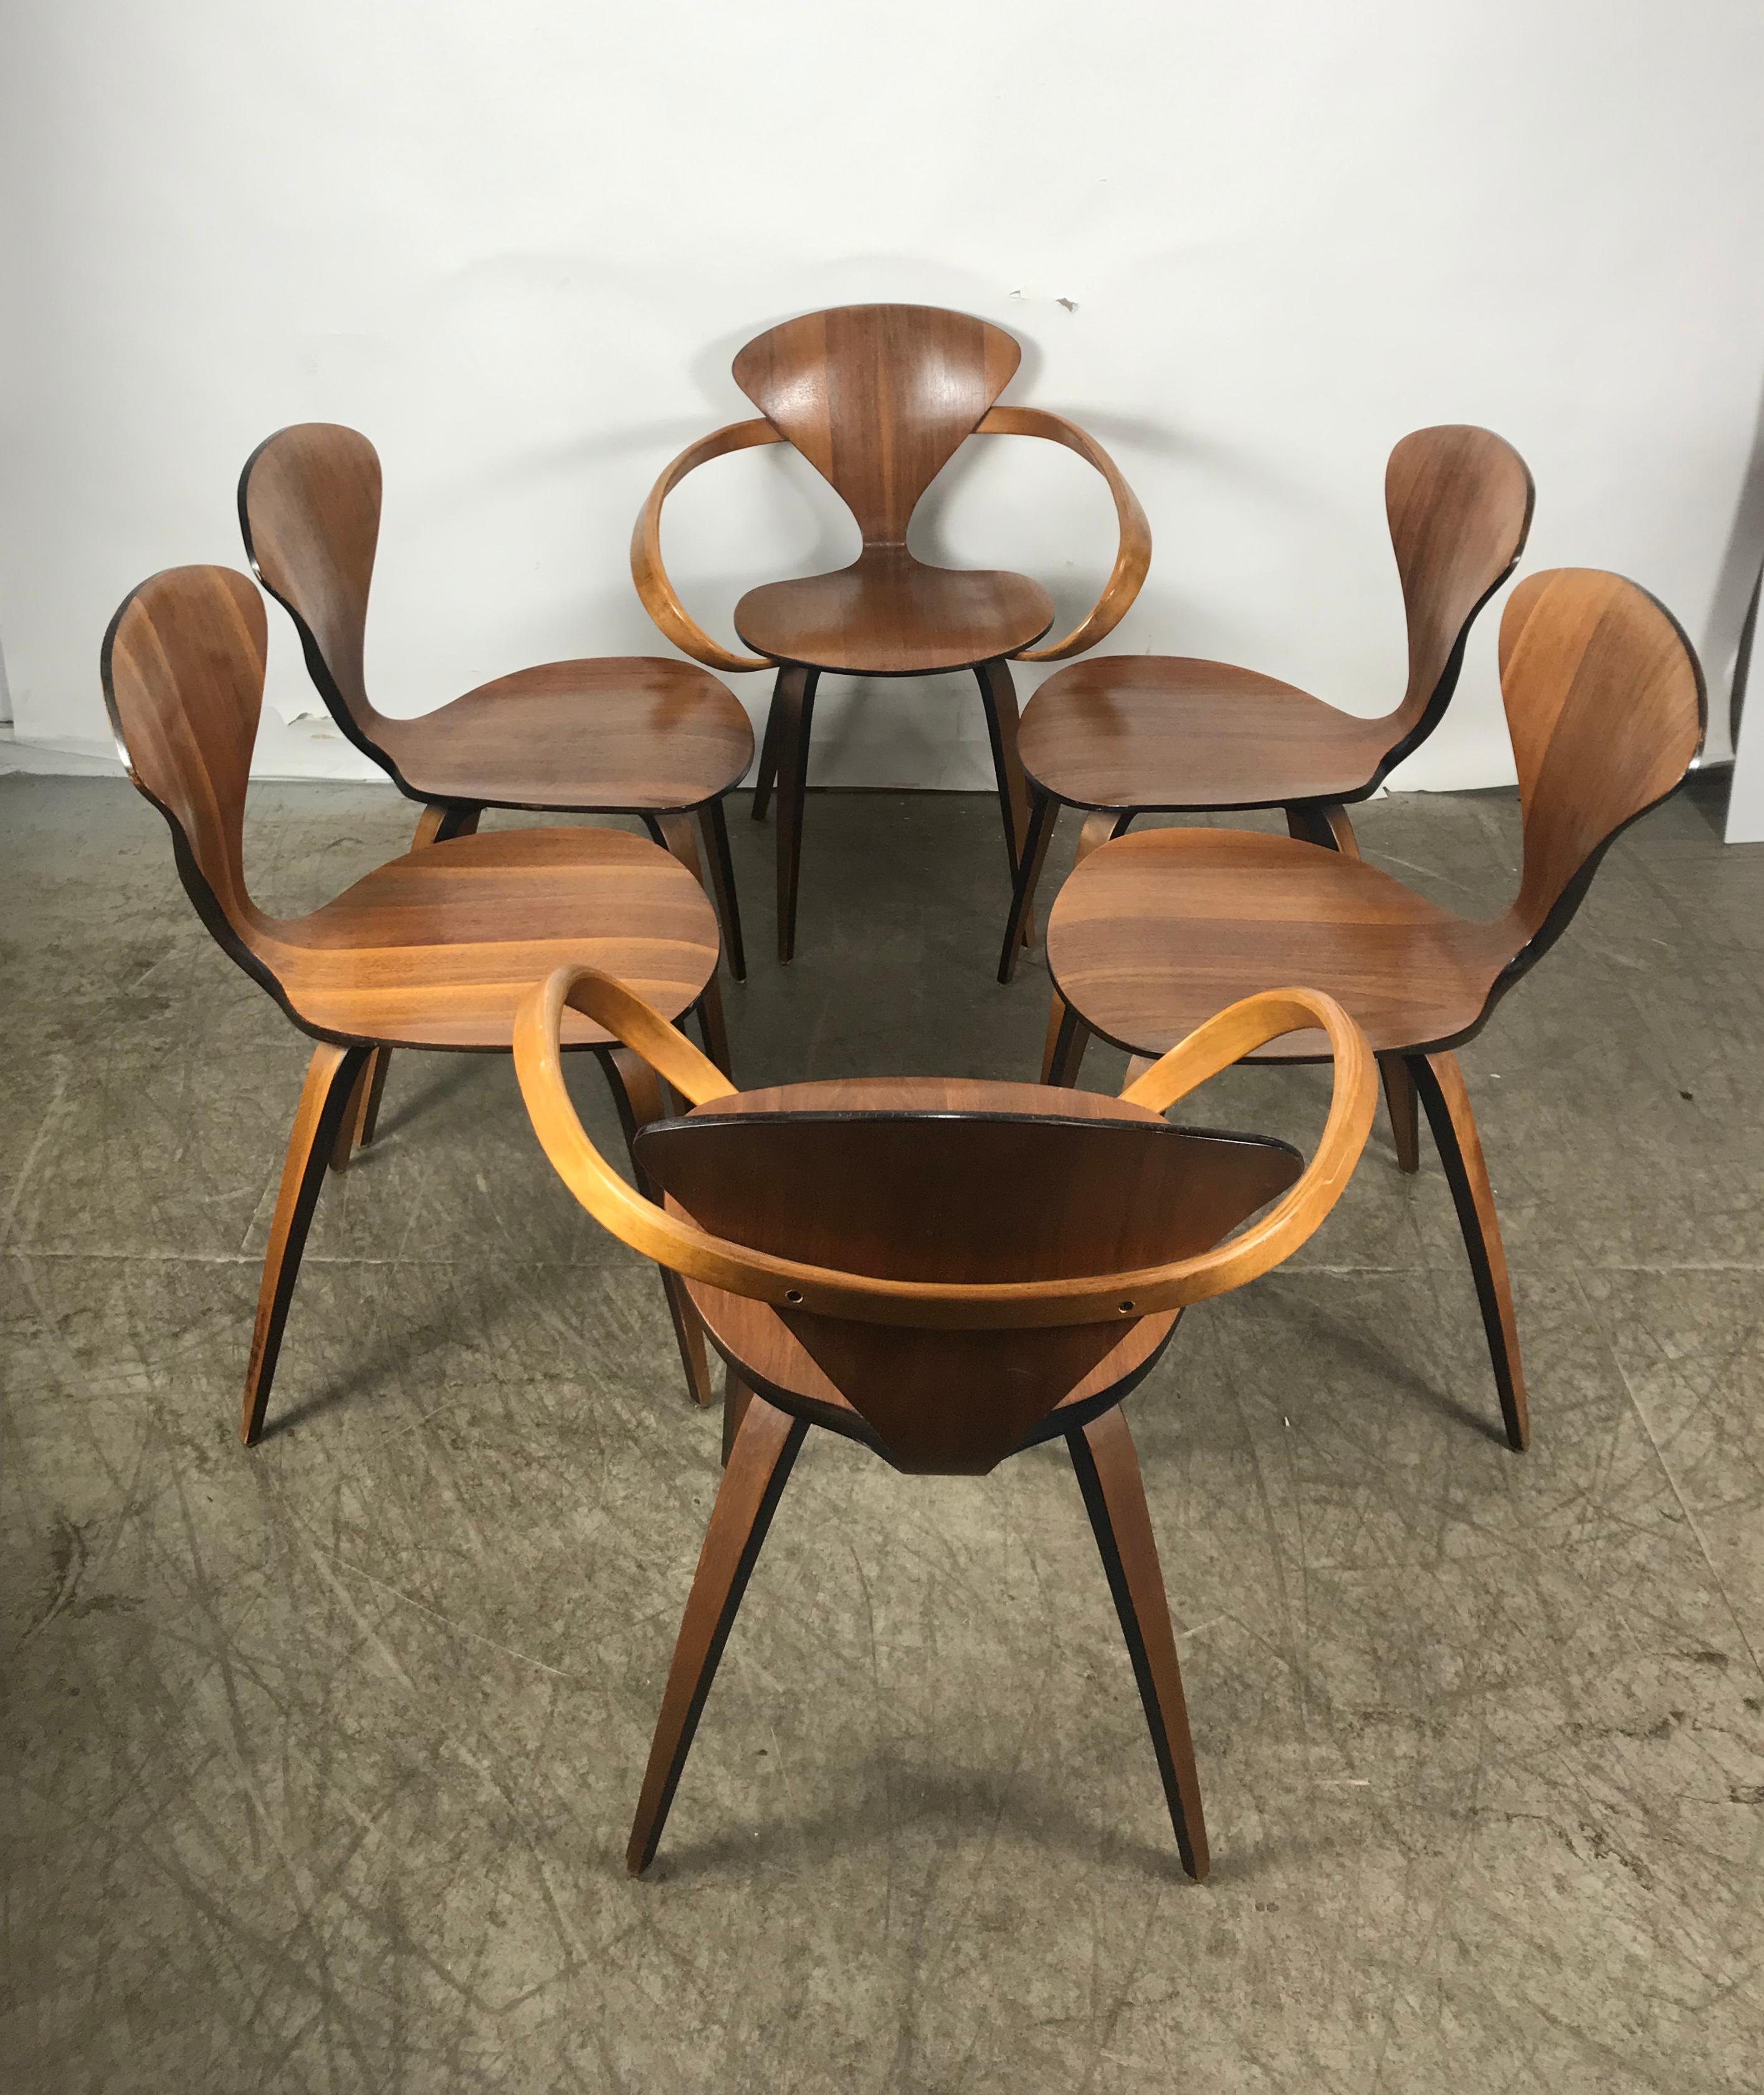 Classic set of six dining chairs designed by Norman Cherner manufactured by Plycraft, Featuring two pretzel captain's chairs and 4 side chairs. Atrue set! The six chairs have lived together since they were purchased in the late 1950s. Amazing